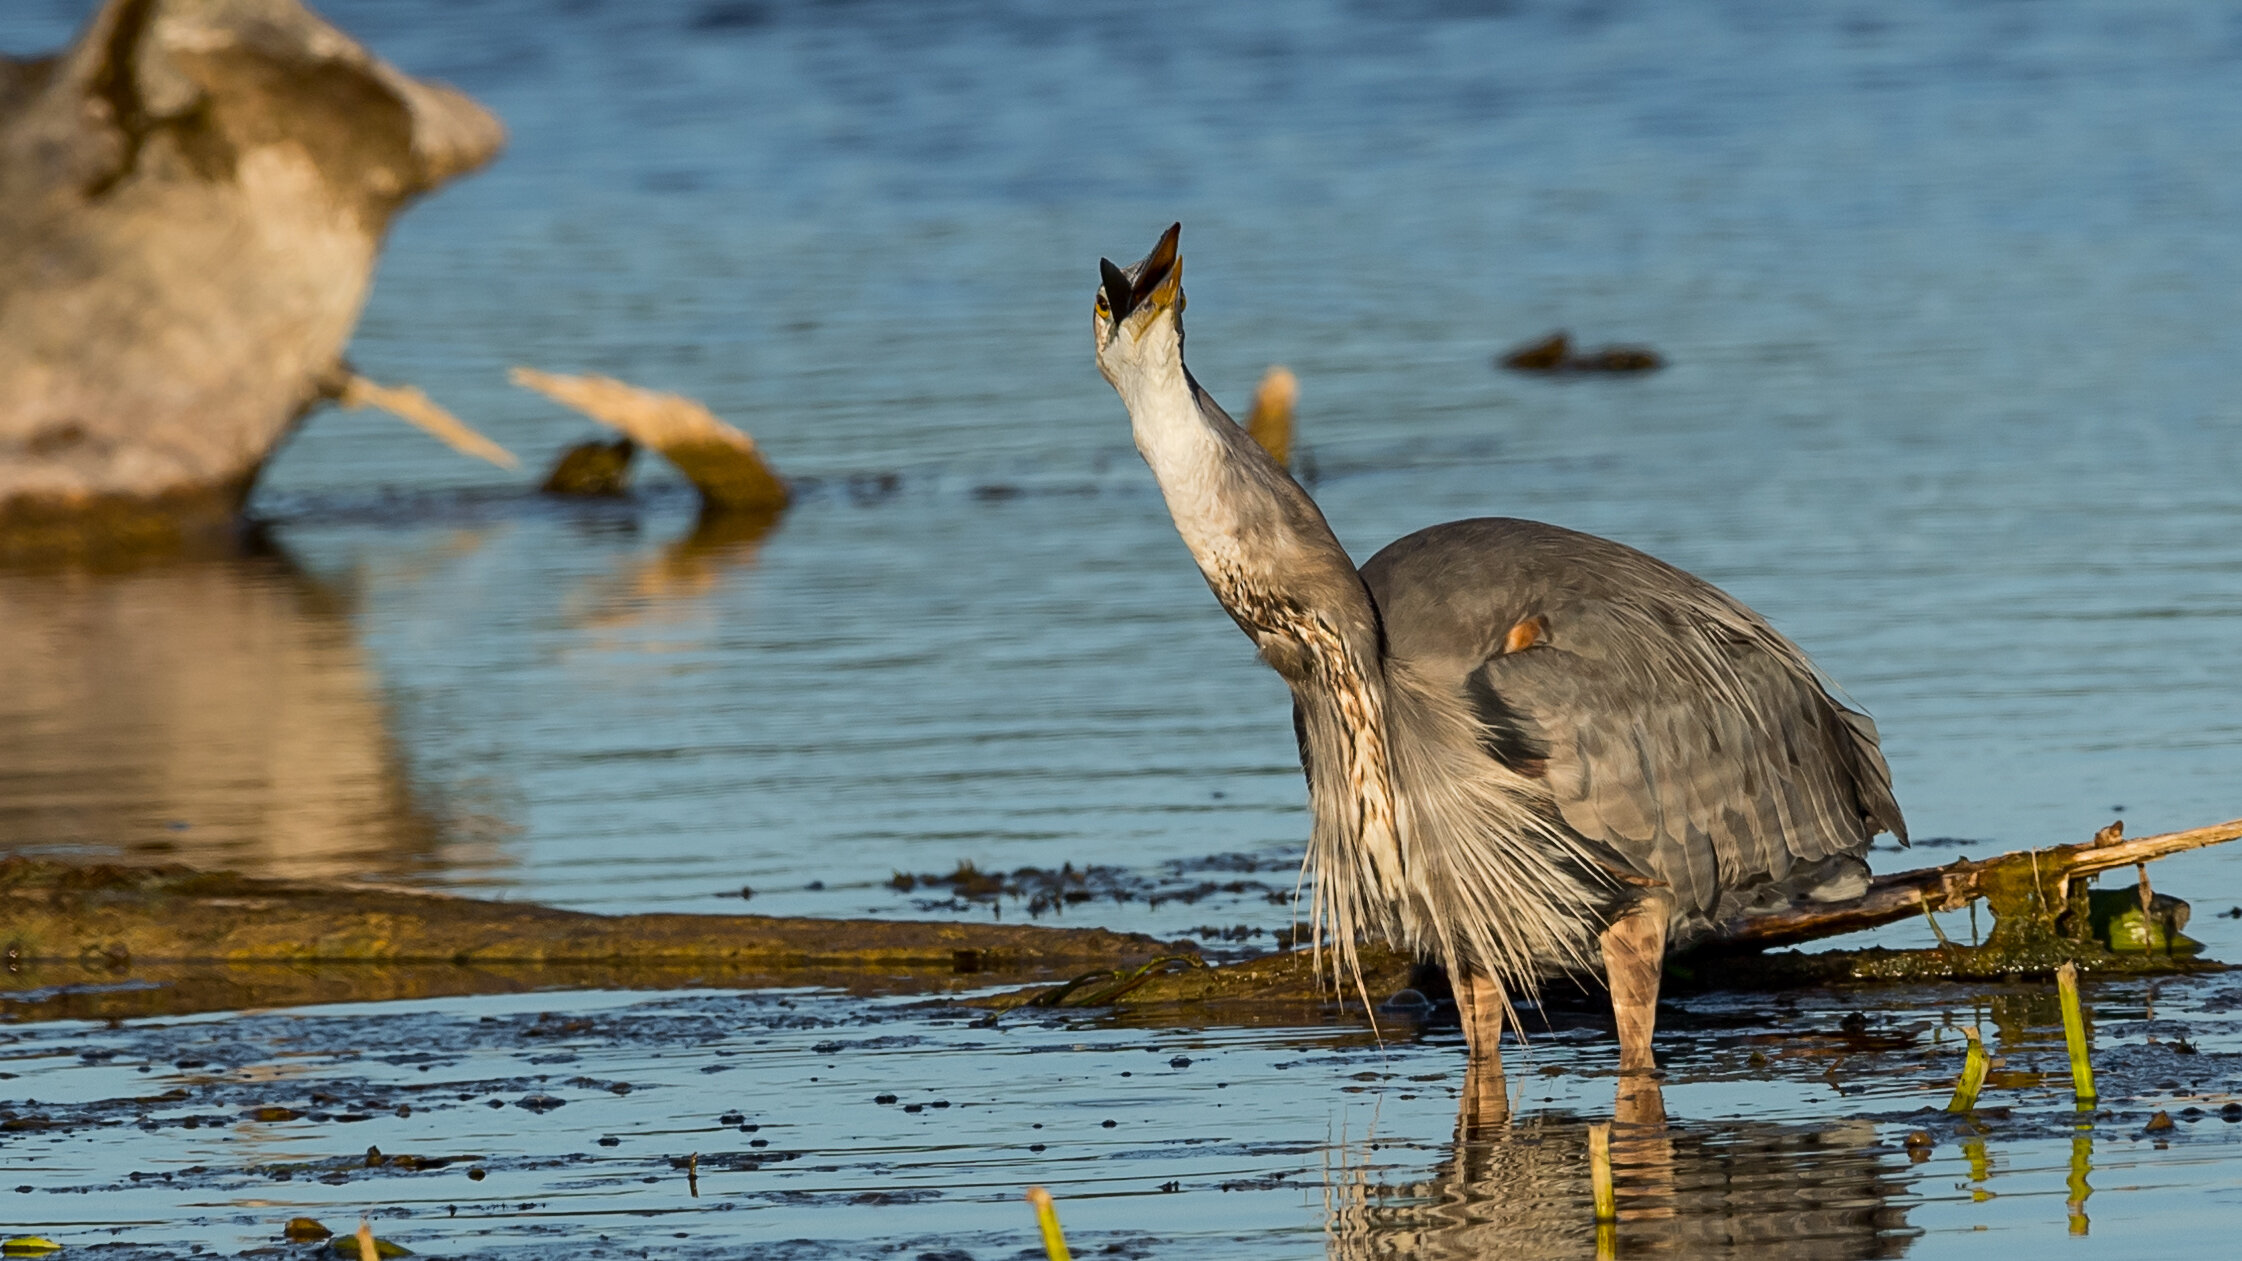 020 Look at the size of the herons neck now with the large fish in its throat.jpg